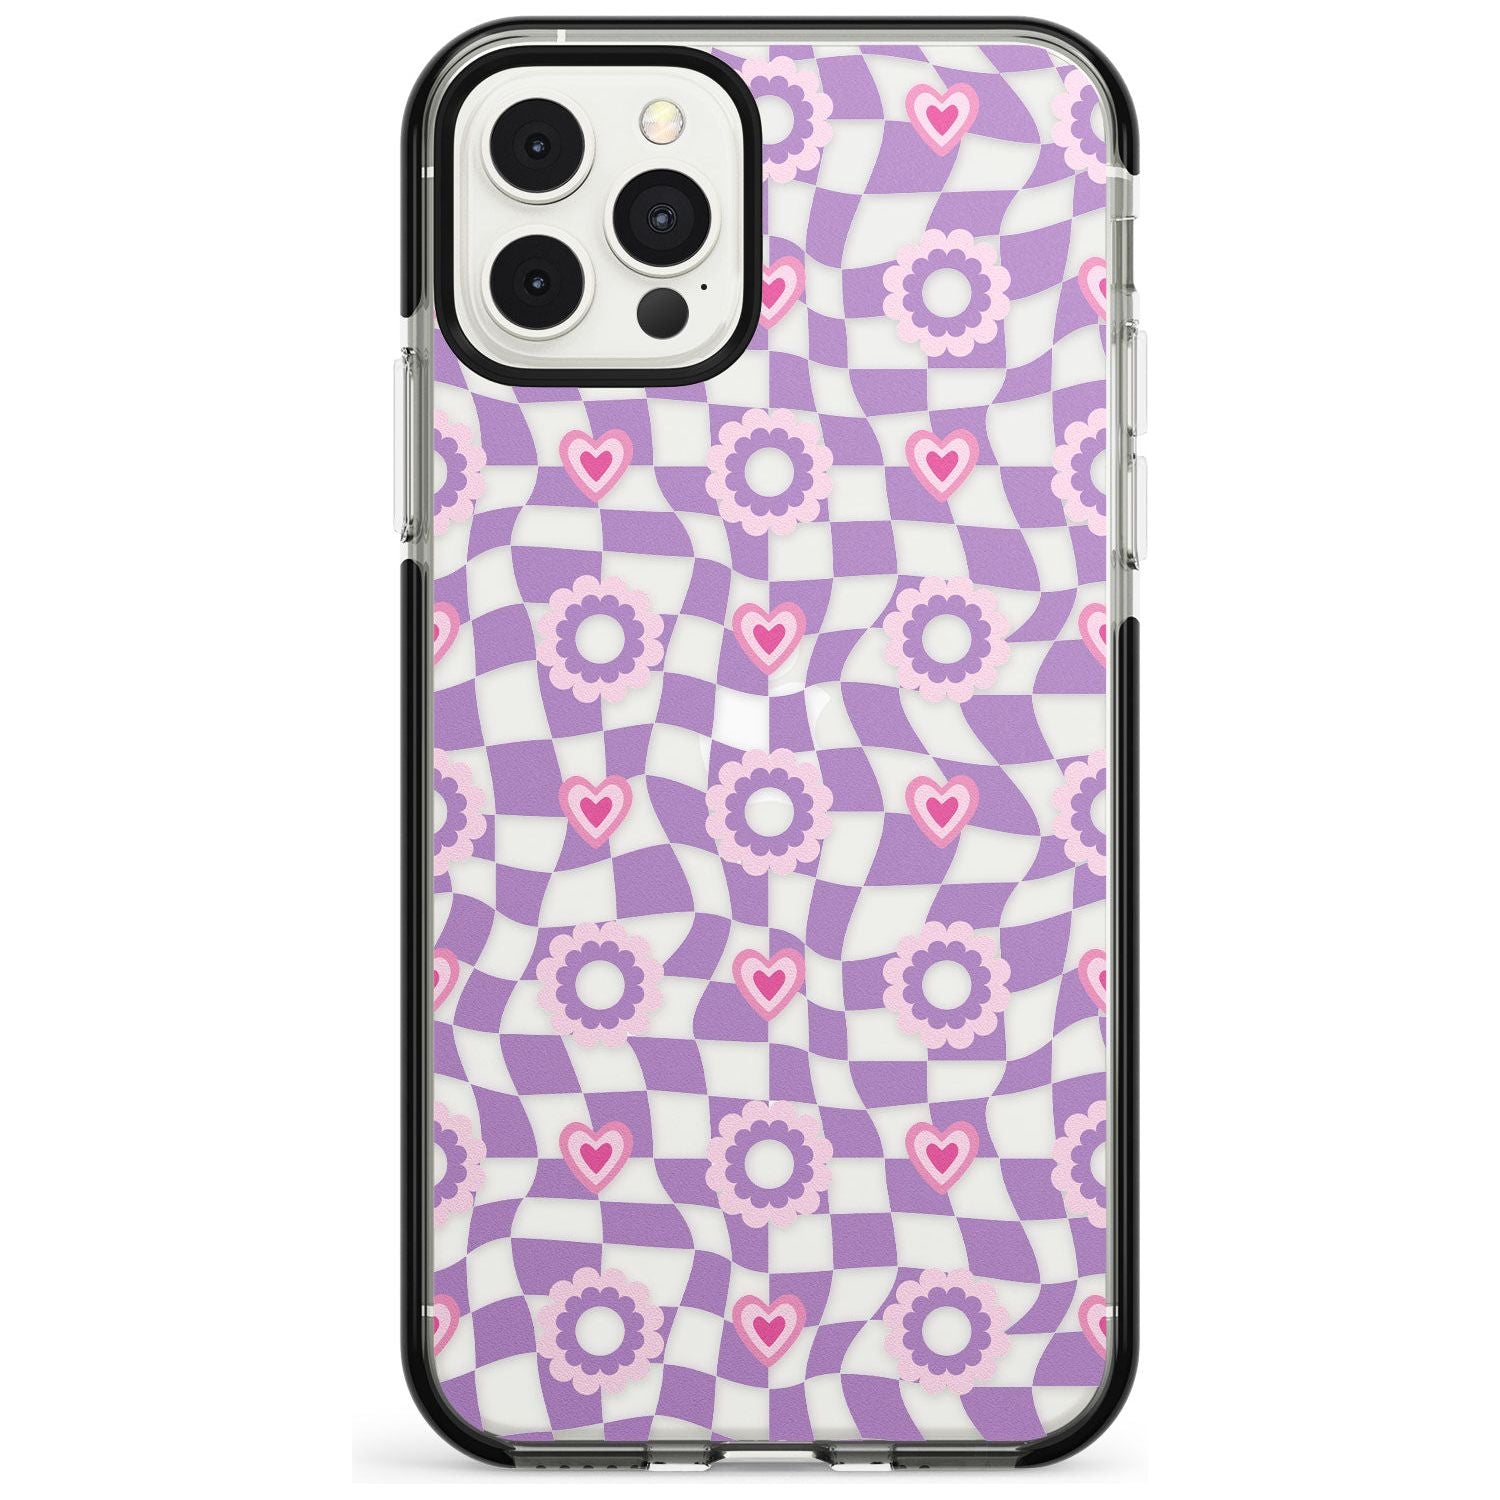 Checkered Love Pattern Black Impact Phone Case for iPhone 11